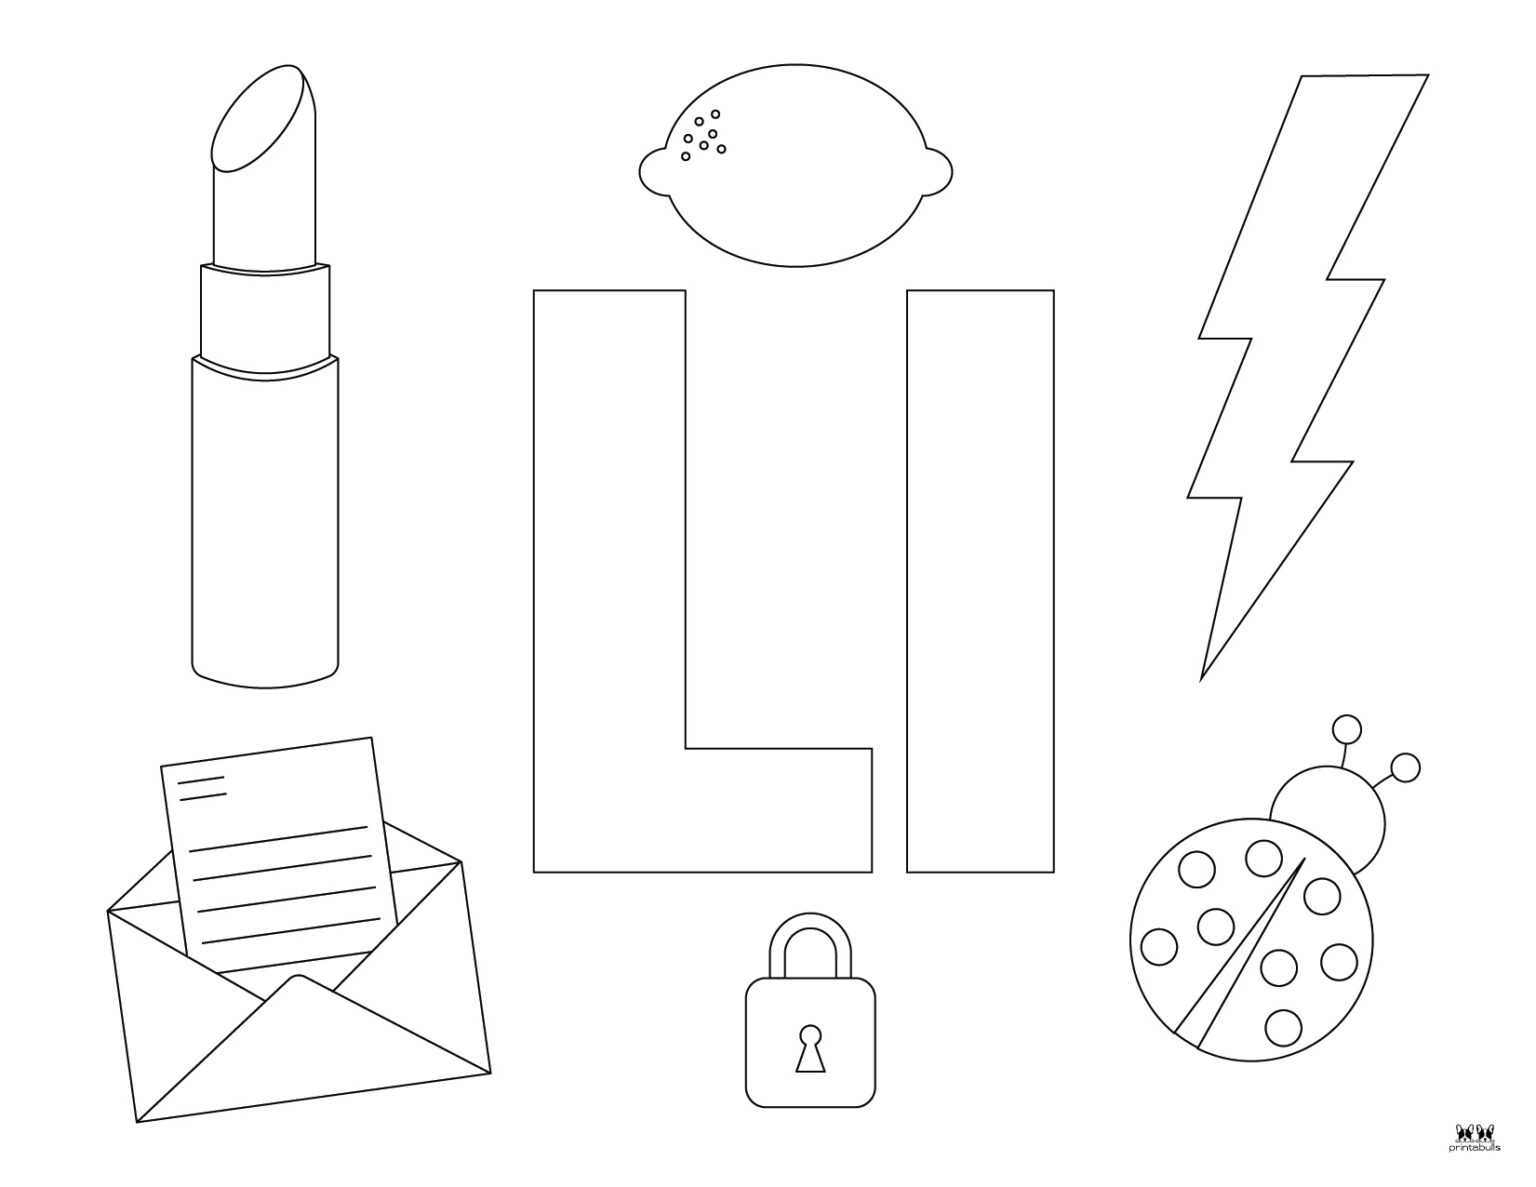 letter-l-coloring-pages-15-free-pages-printabulls